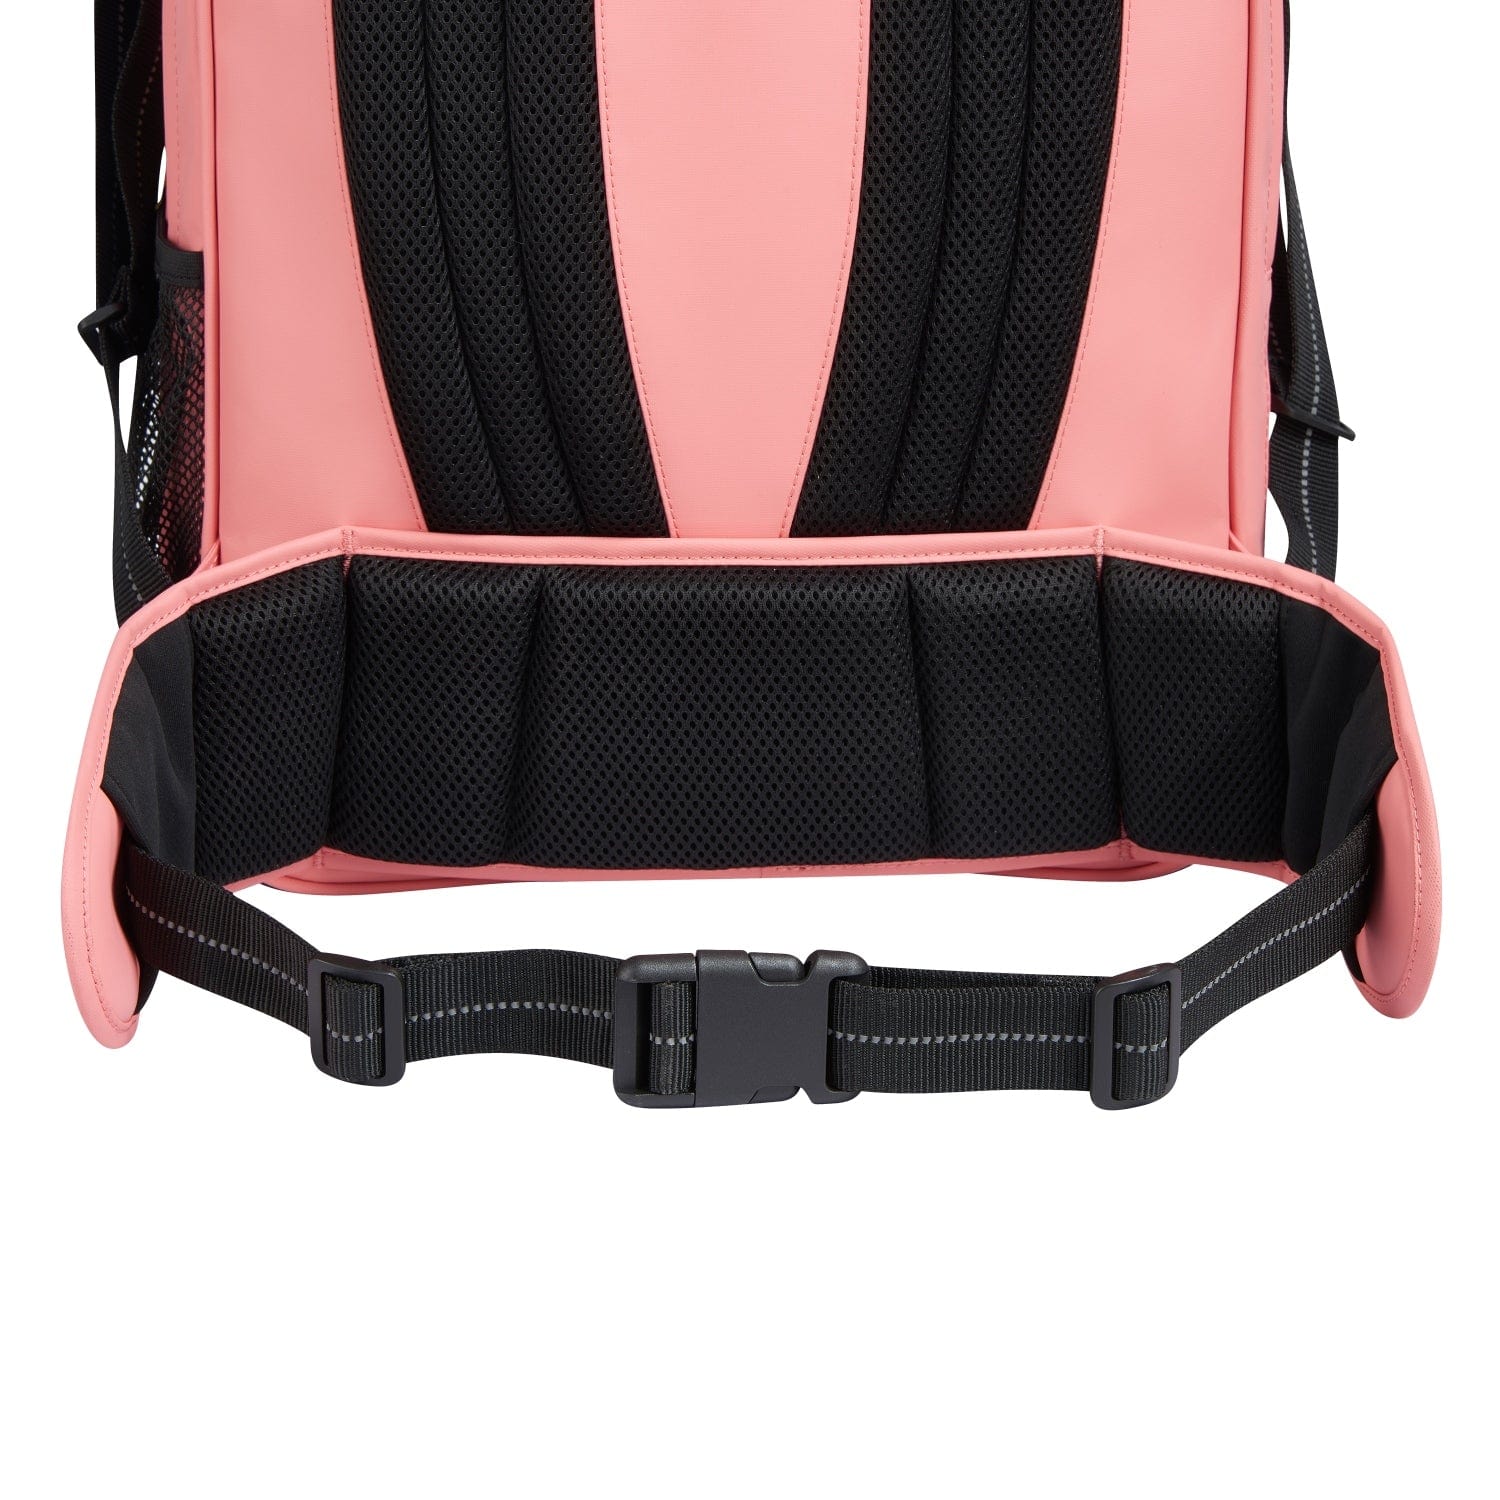 Delsey BTS 2023 2 Compartment Backpack - 15.6" Pink Printing - 00338962119